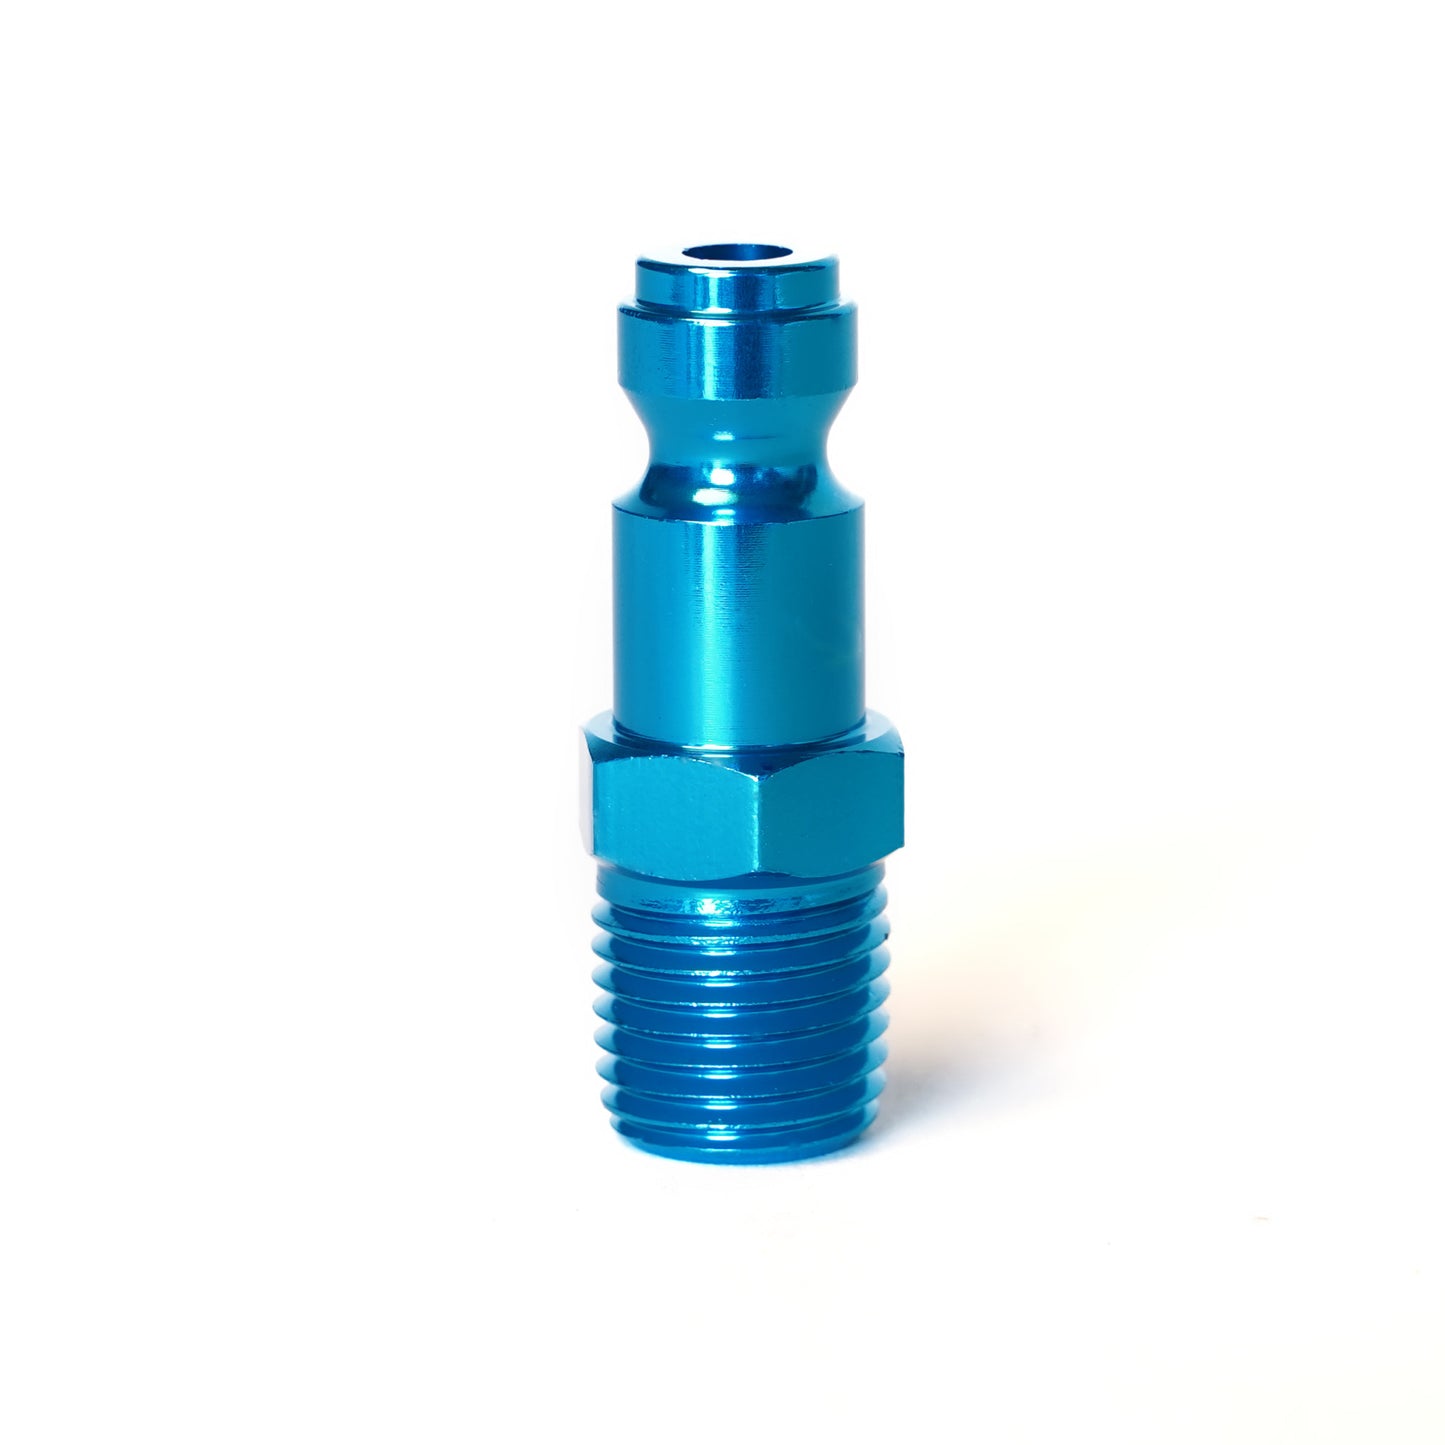 1/4-inch Plated Steel Automotive Quick Disconnect Plug with 1/4-inch Male NPT Threads